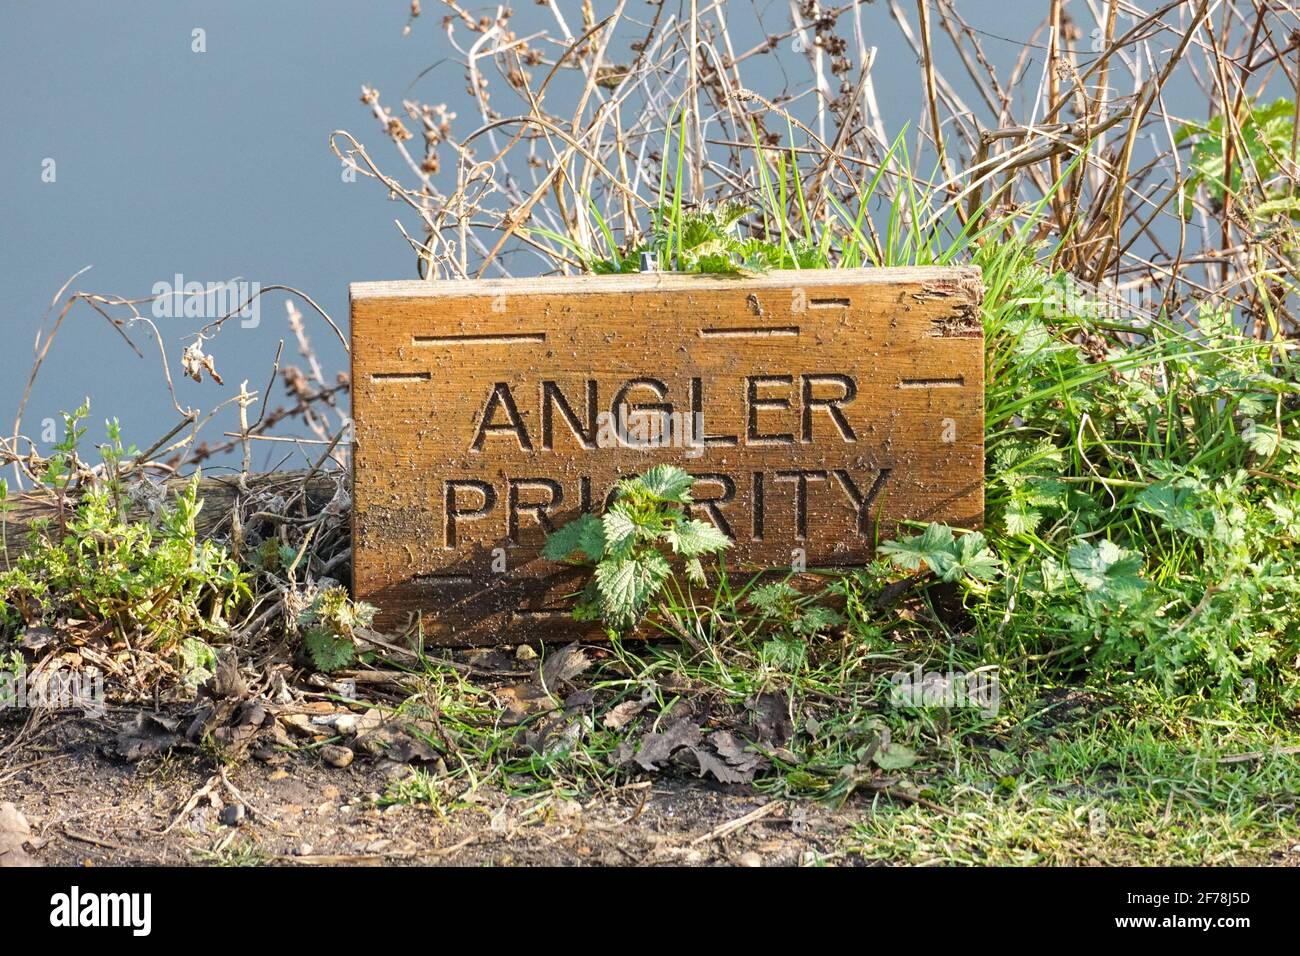 Angler priority sign on fishing spot on the lake, UK Stock Photo